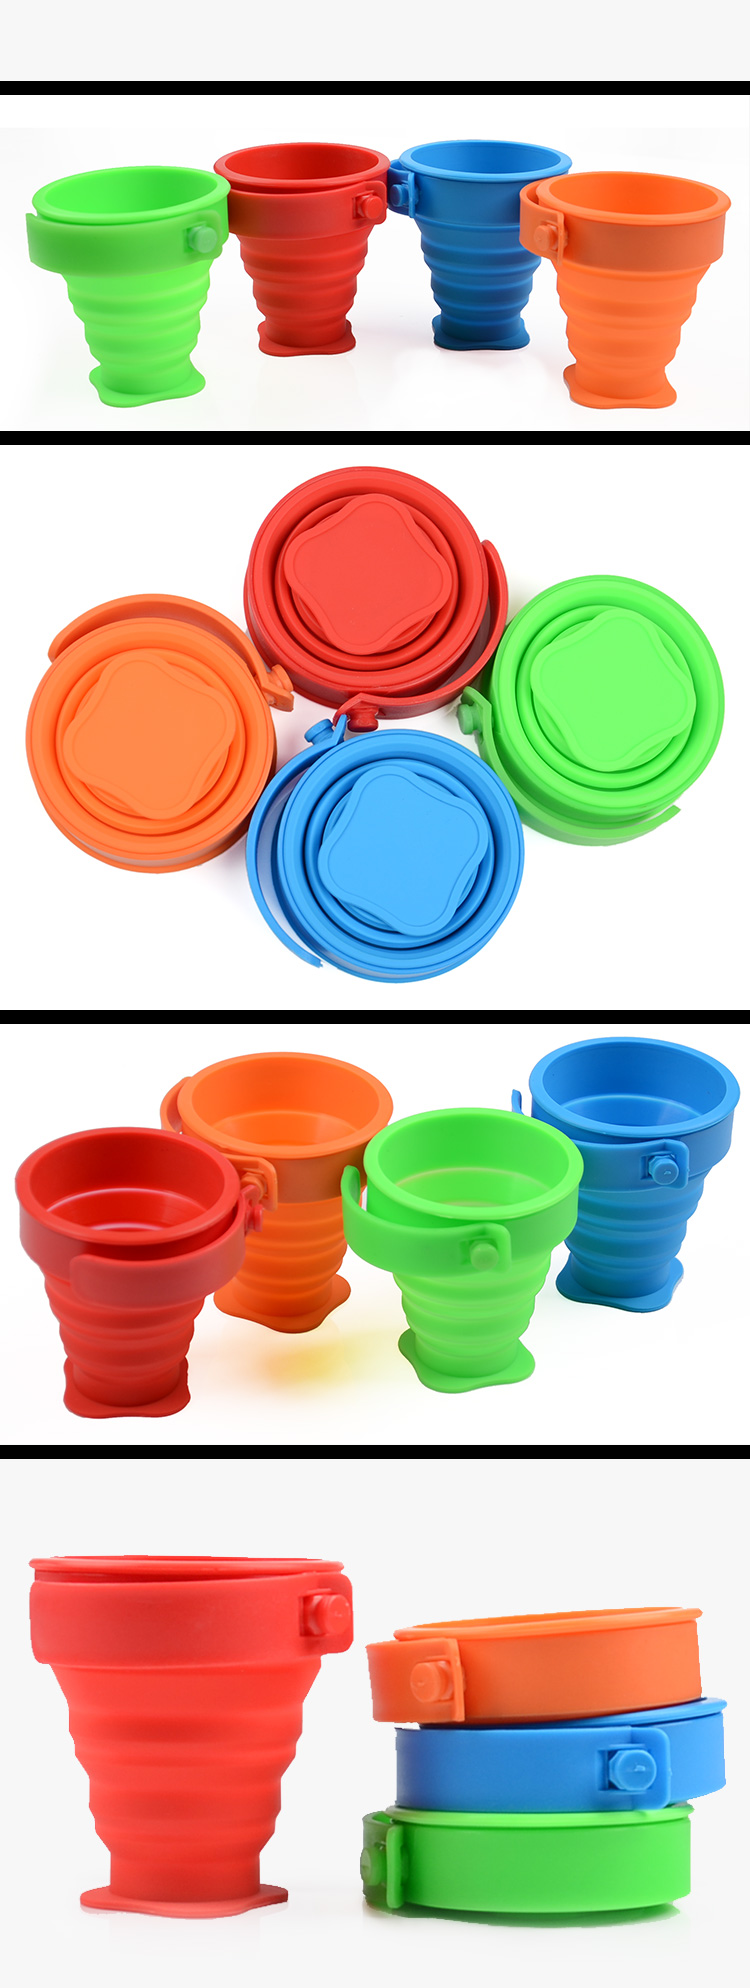 alibaba best sellers silicone foldable kids mug cup 13